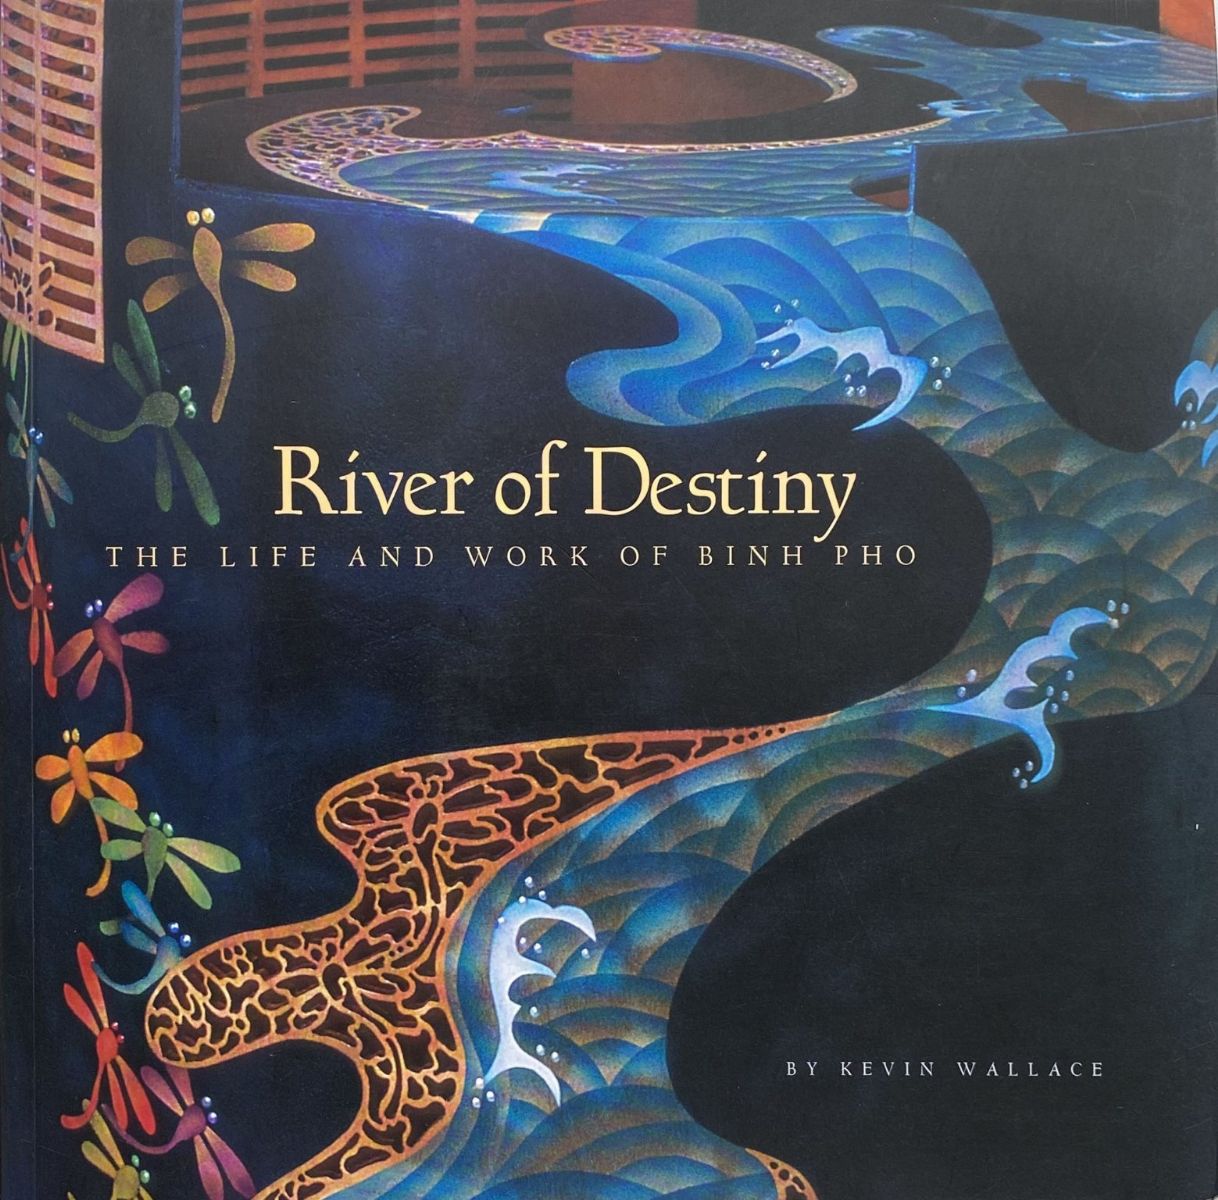 RIVER OF DESTINY: The Life and Work of Binh Pho